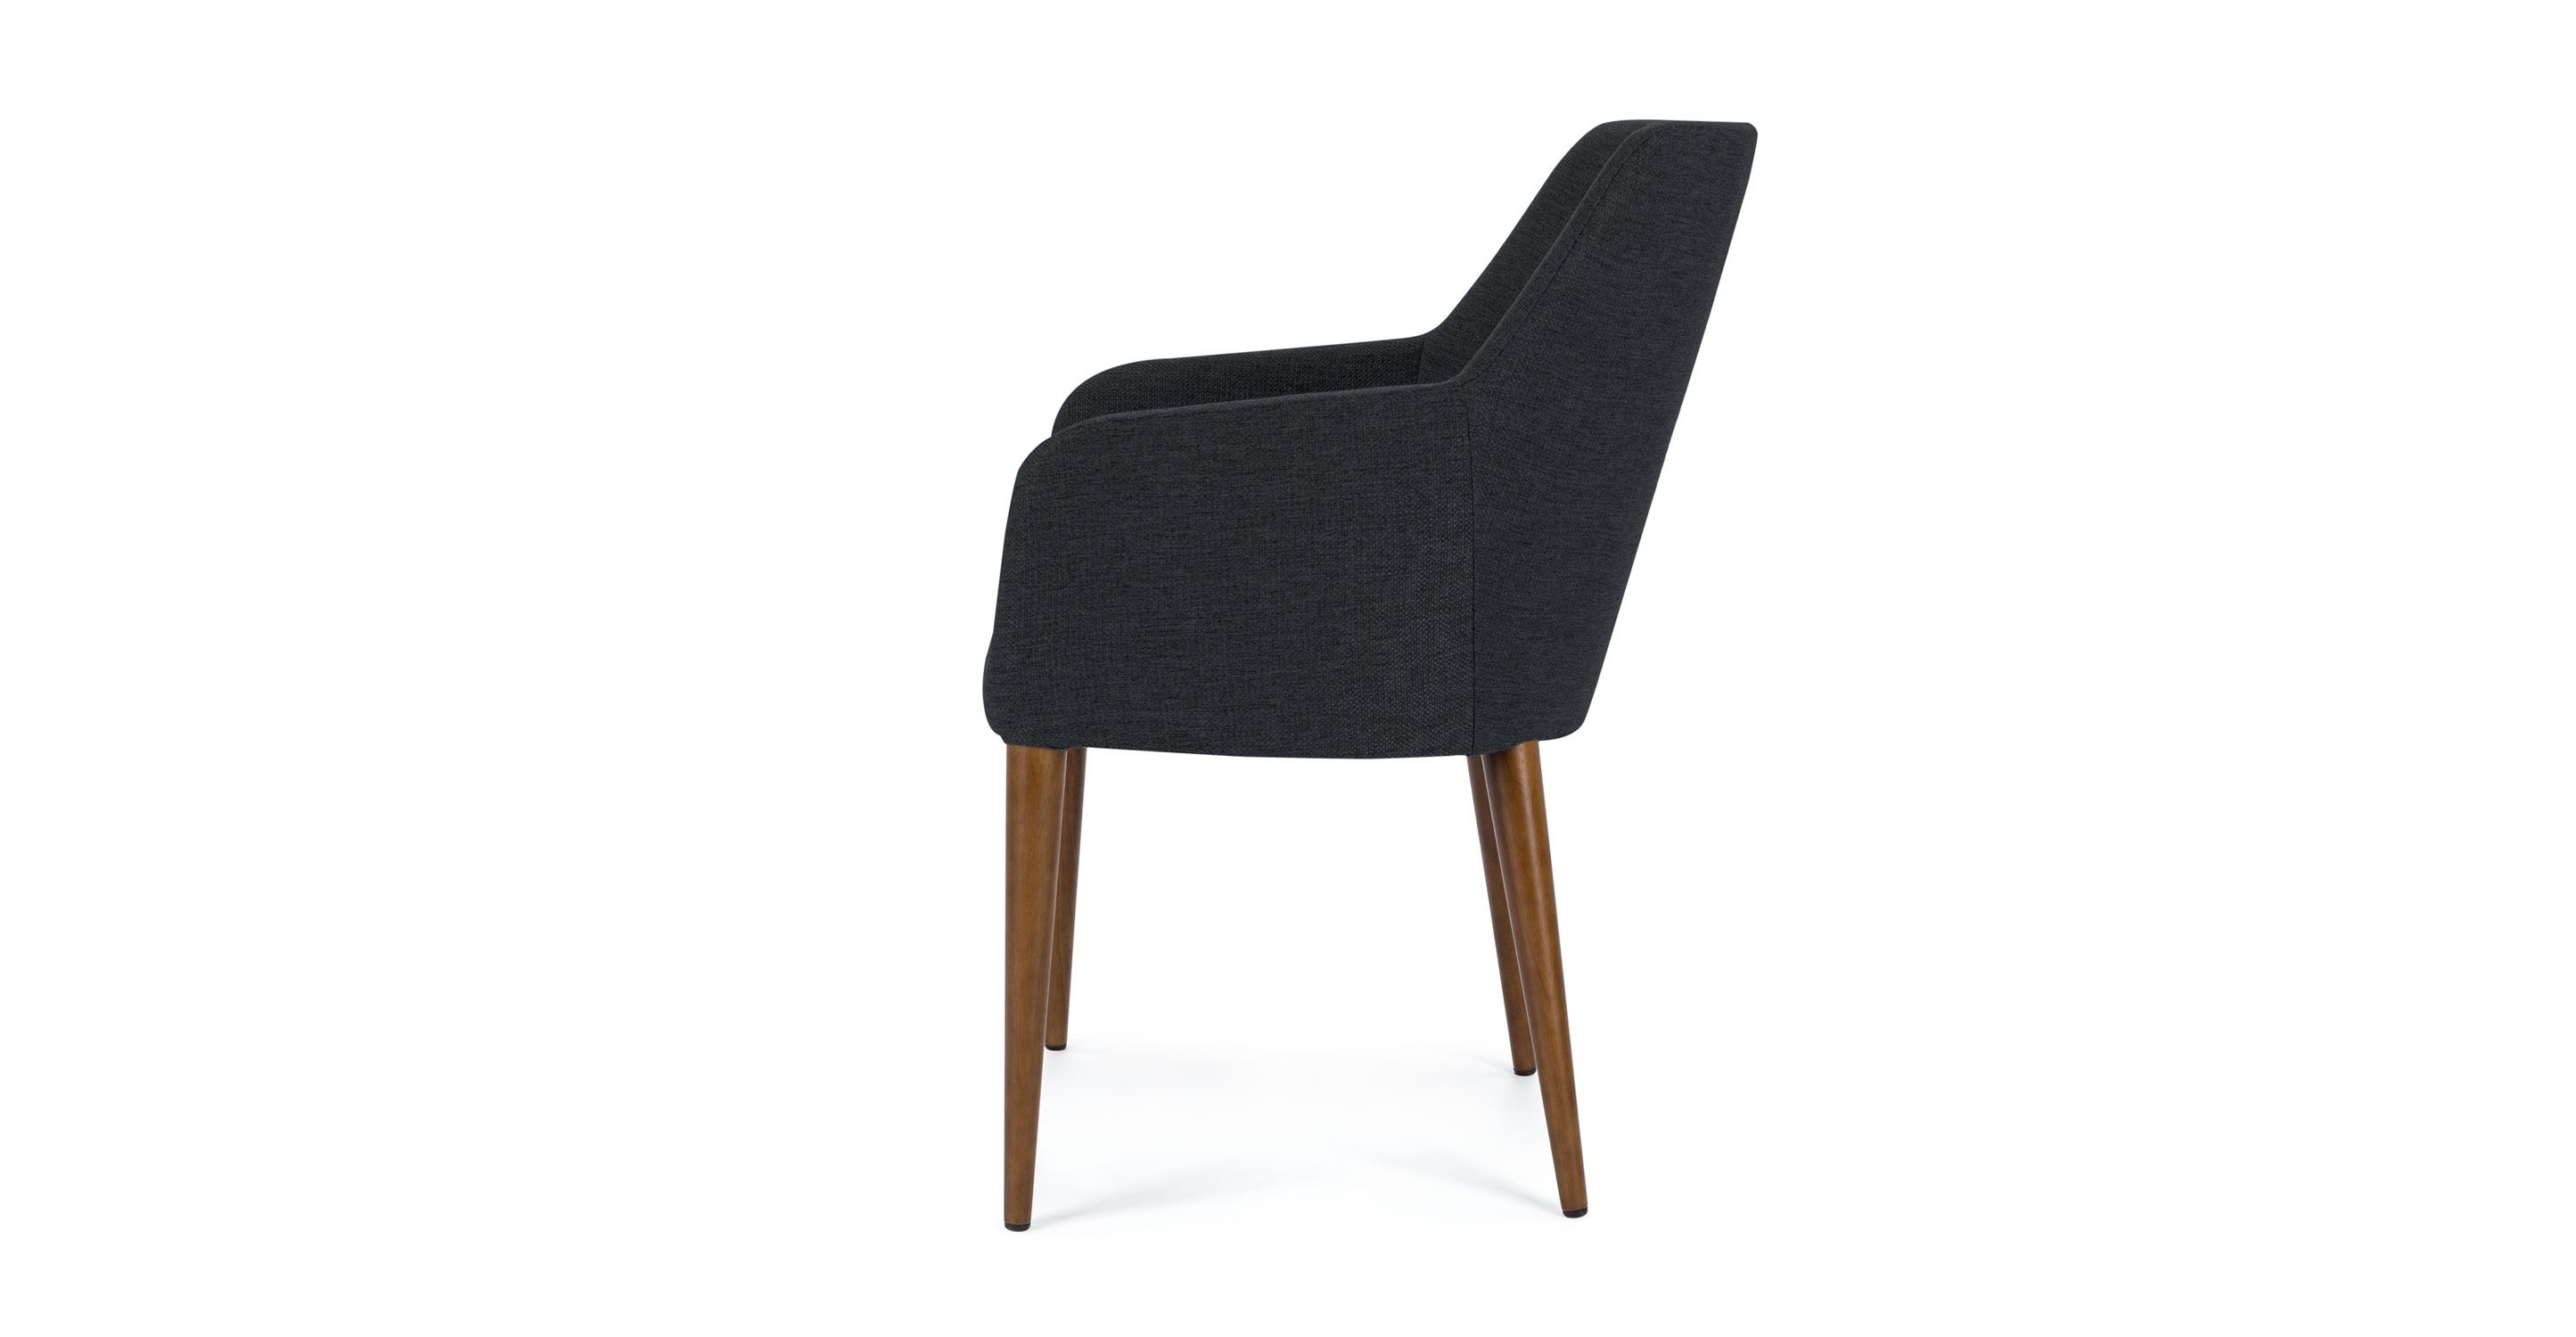 Feast Bard Gray Dining Chair - Image 2